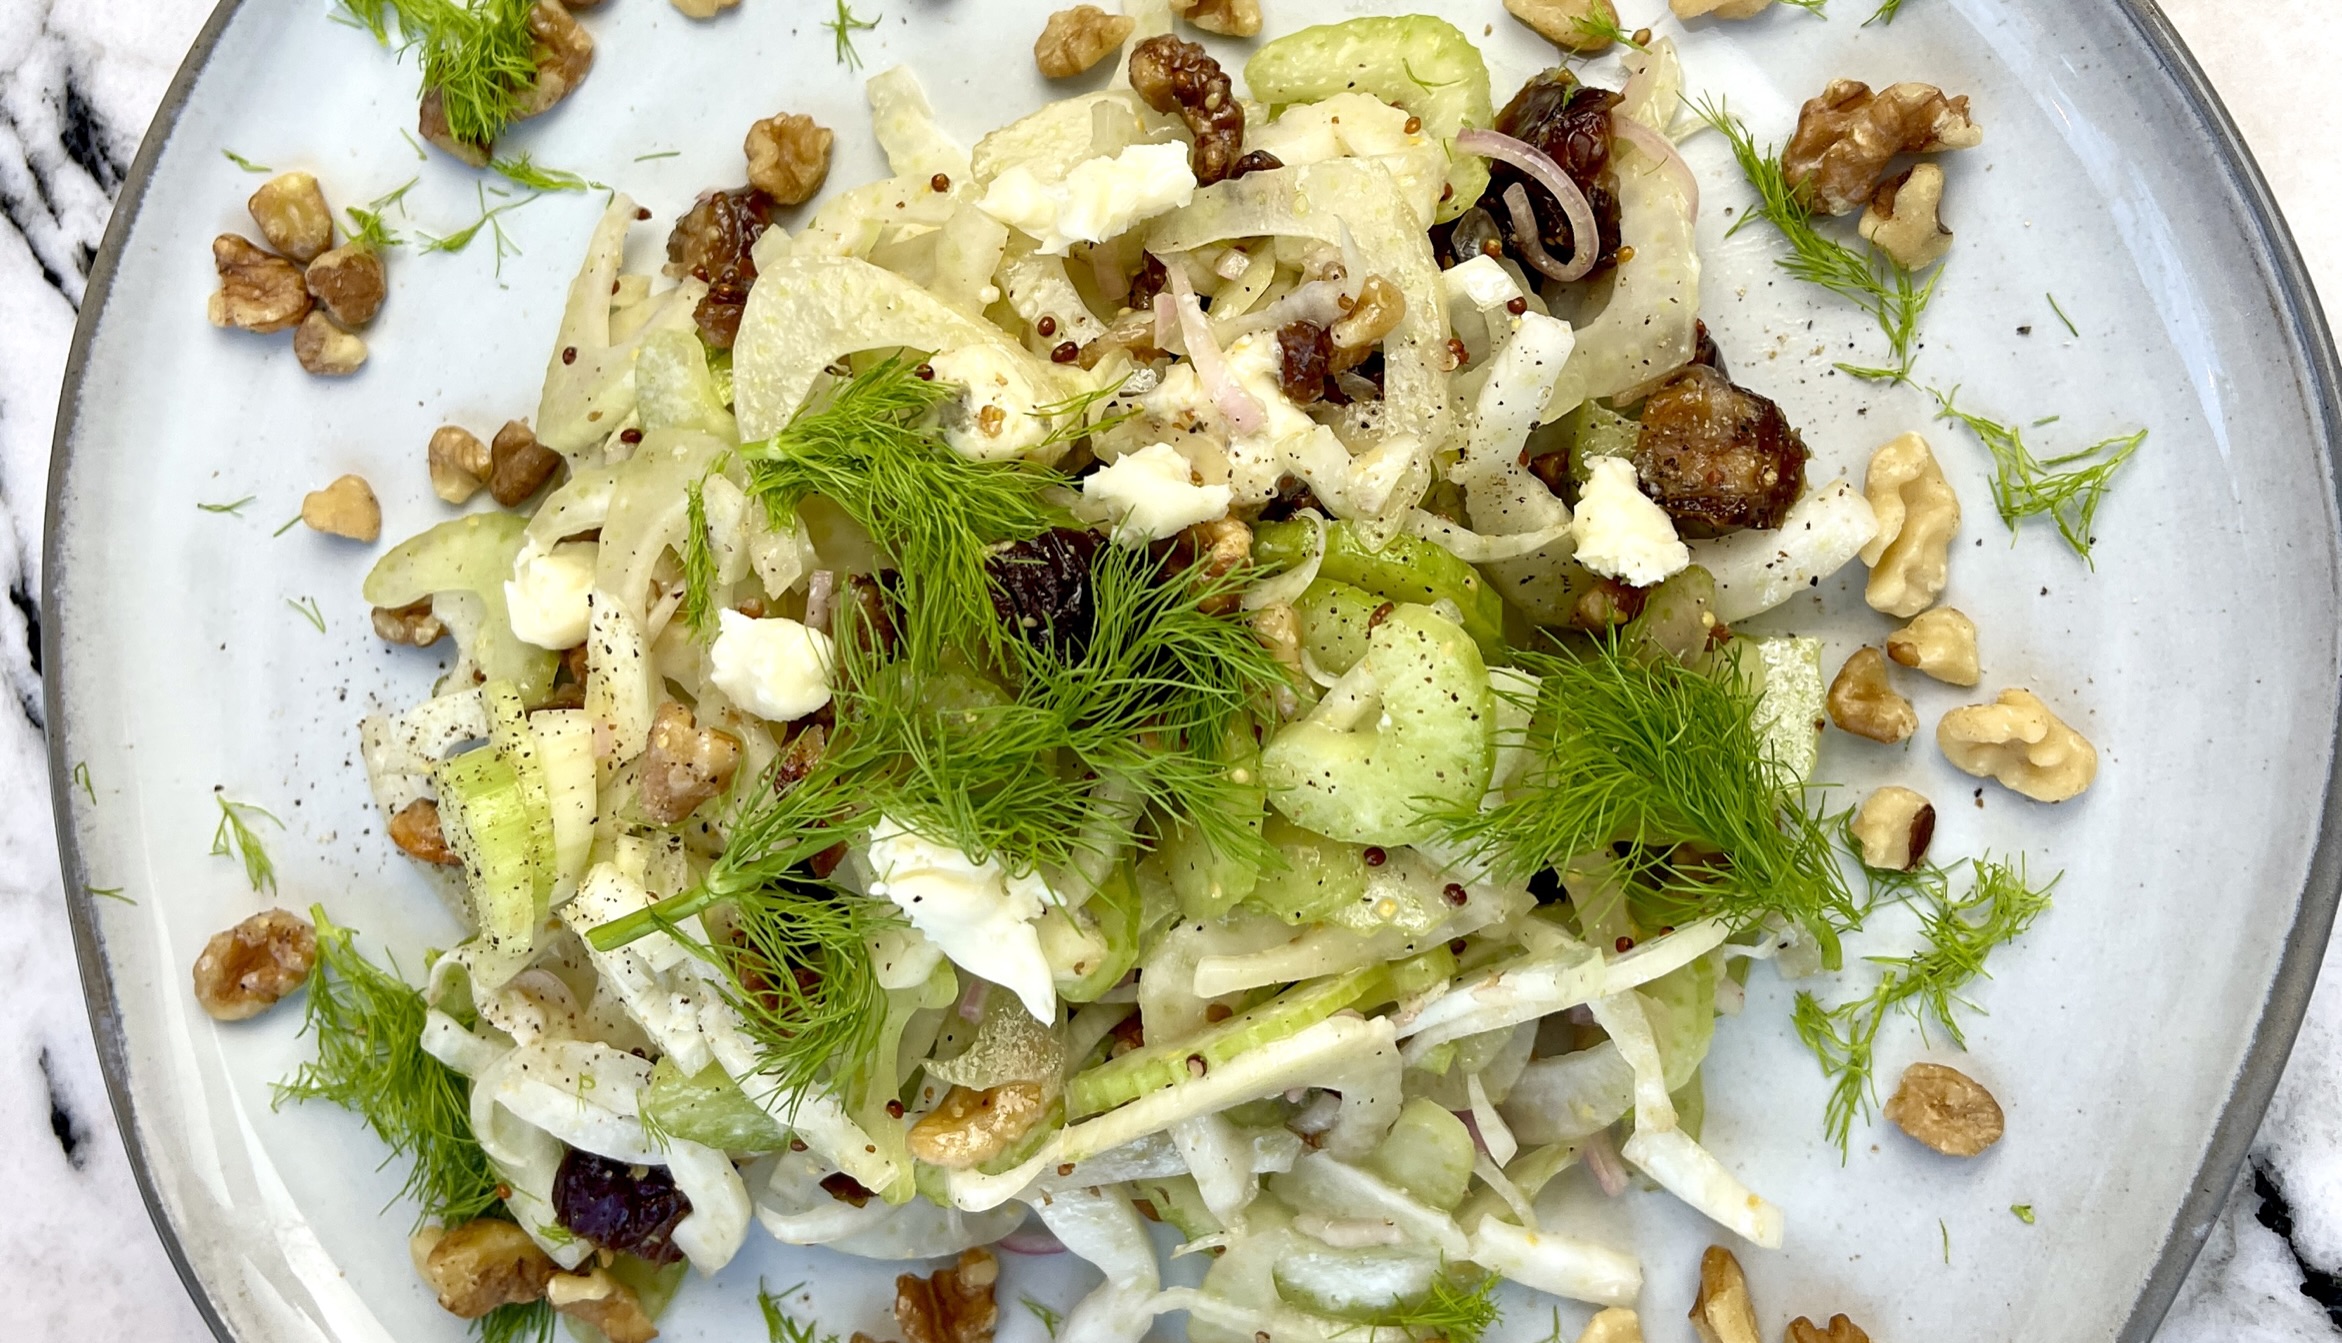 Fennel-Celery Salad with Walnuts and Blue Cheese